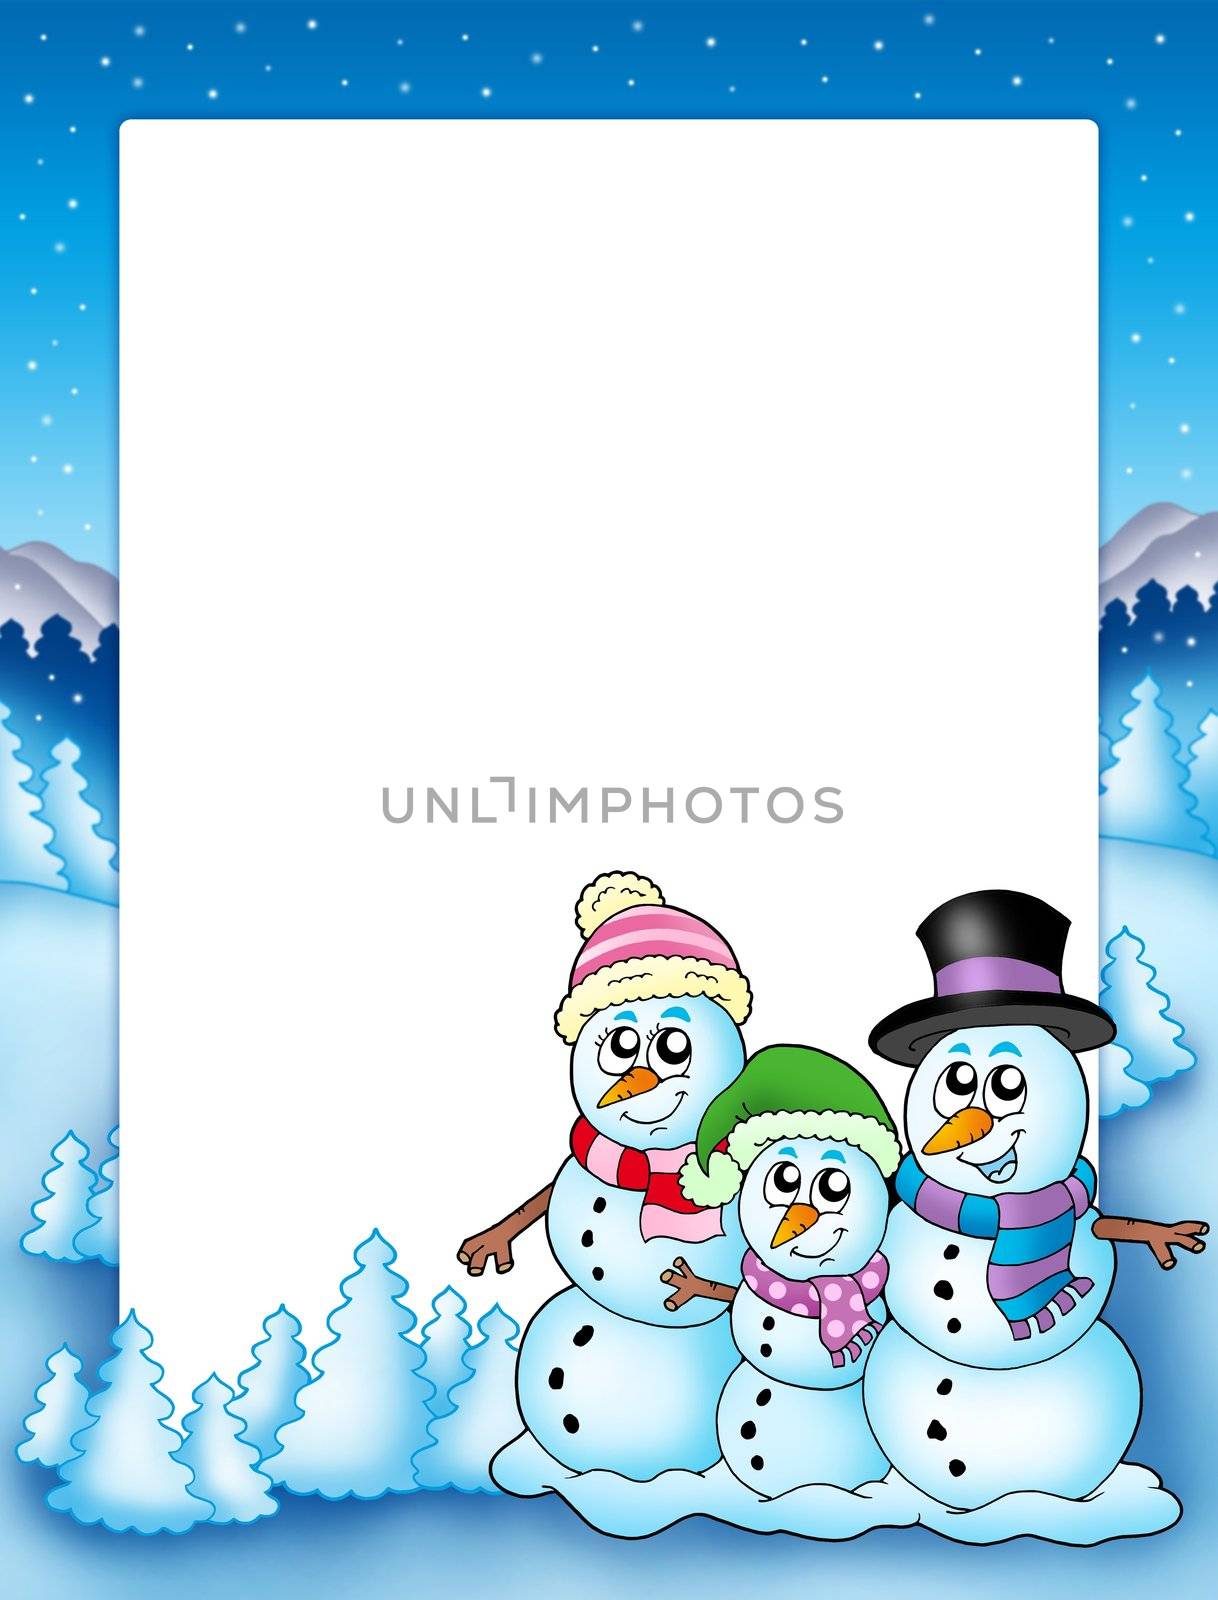 Winter frame with snowman family - color illustration.